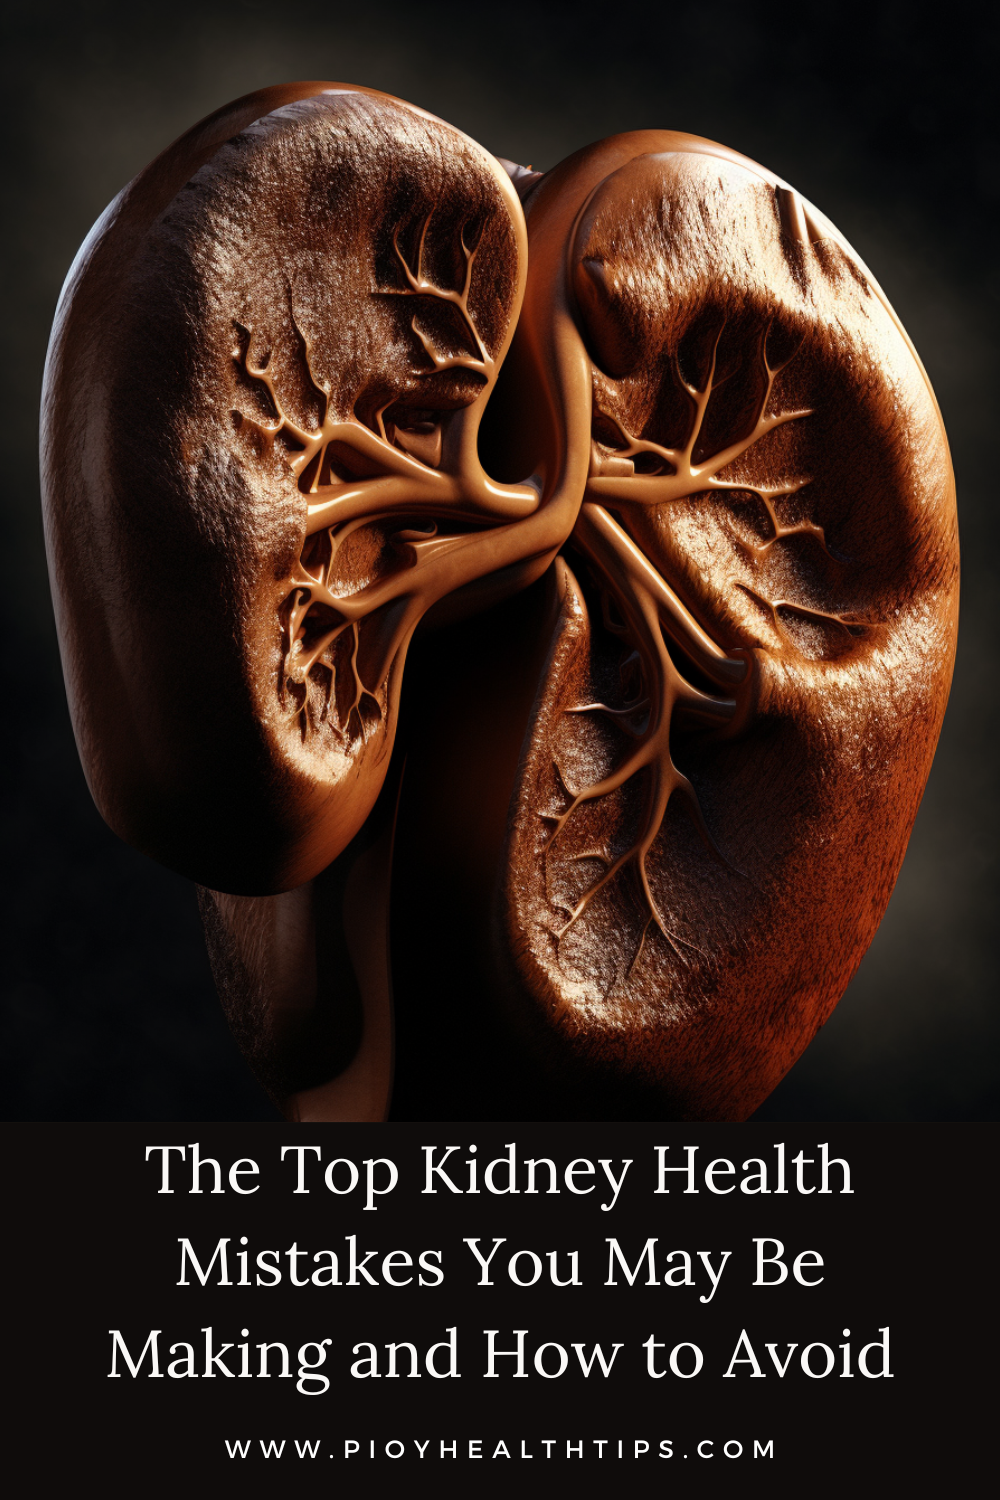 The Top Kidney Health Mistakes You May Be Making and How to Avoid Them